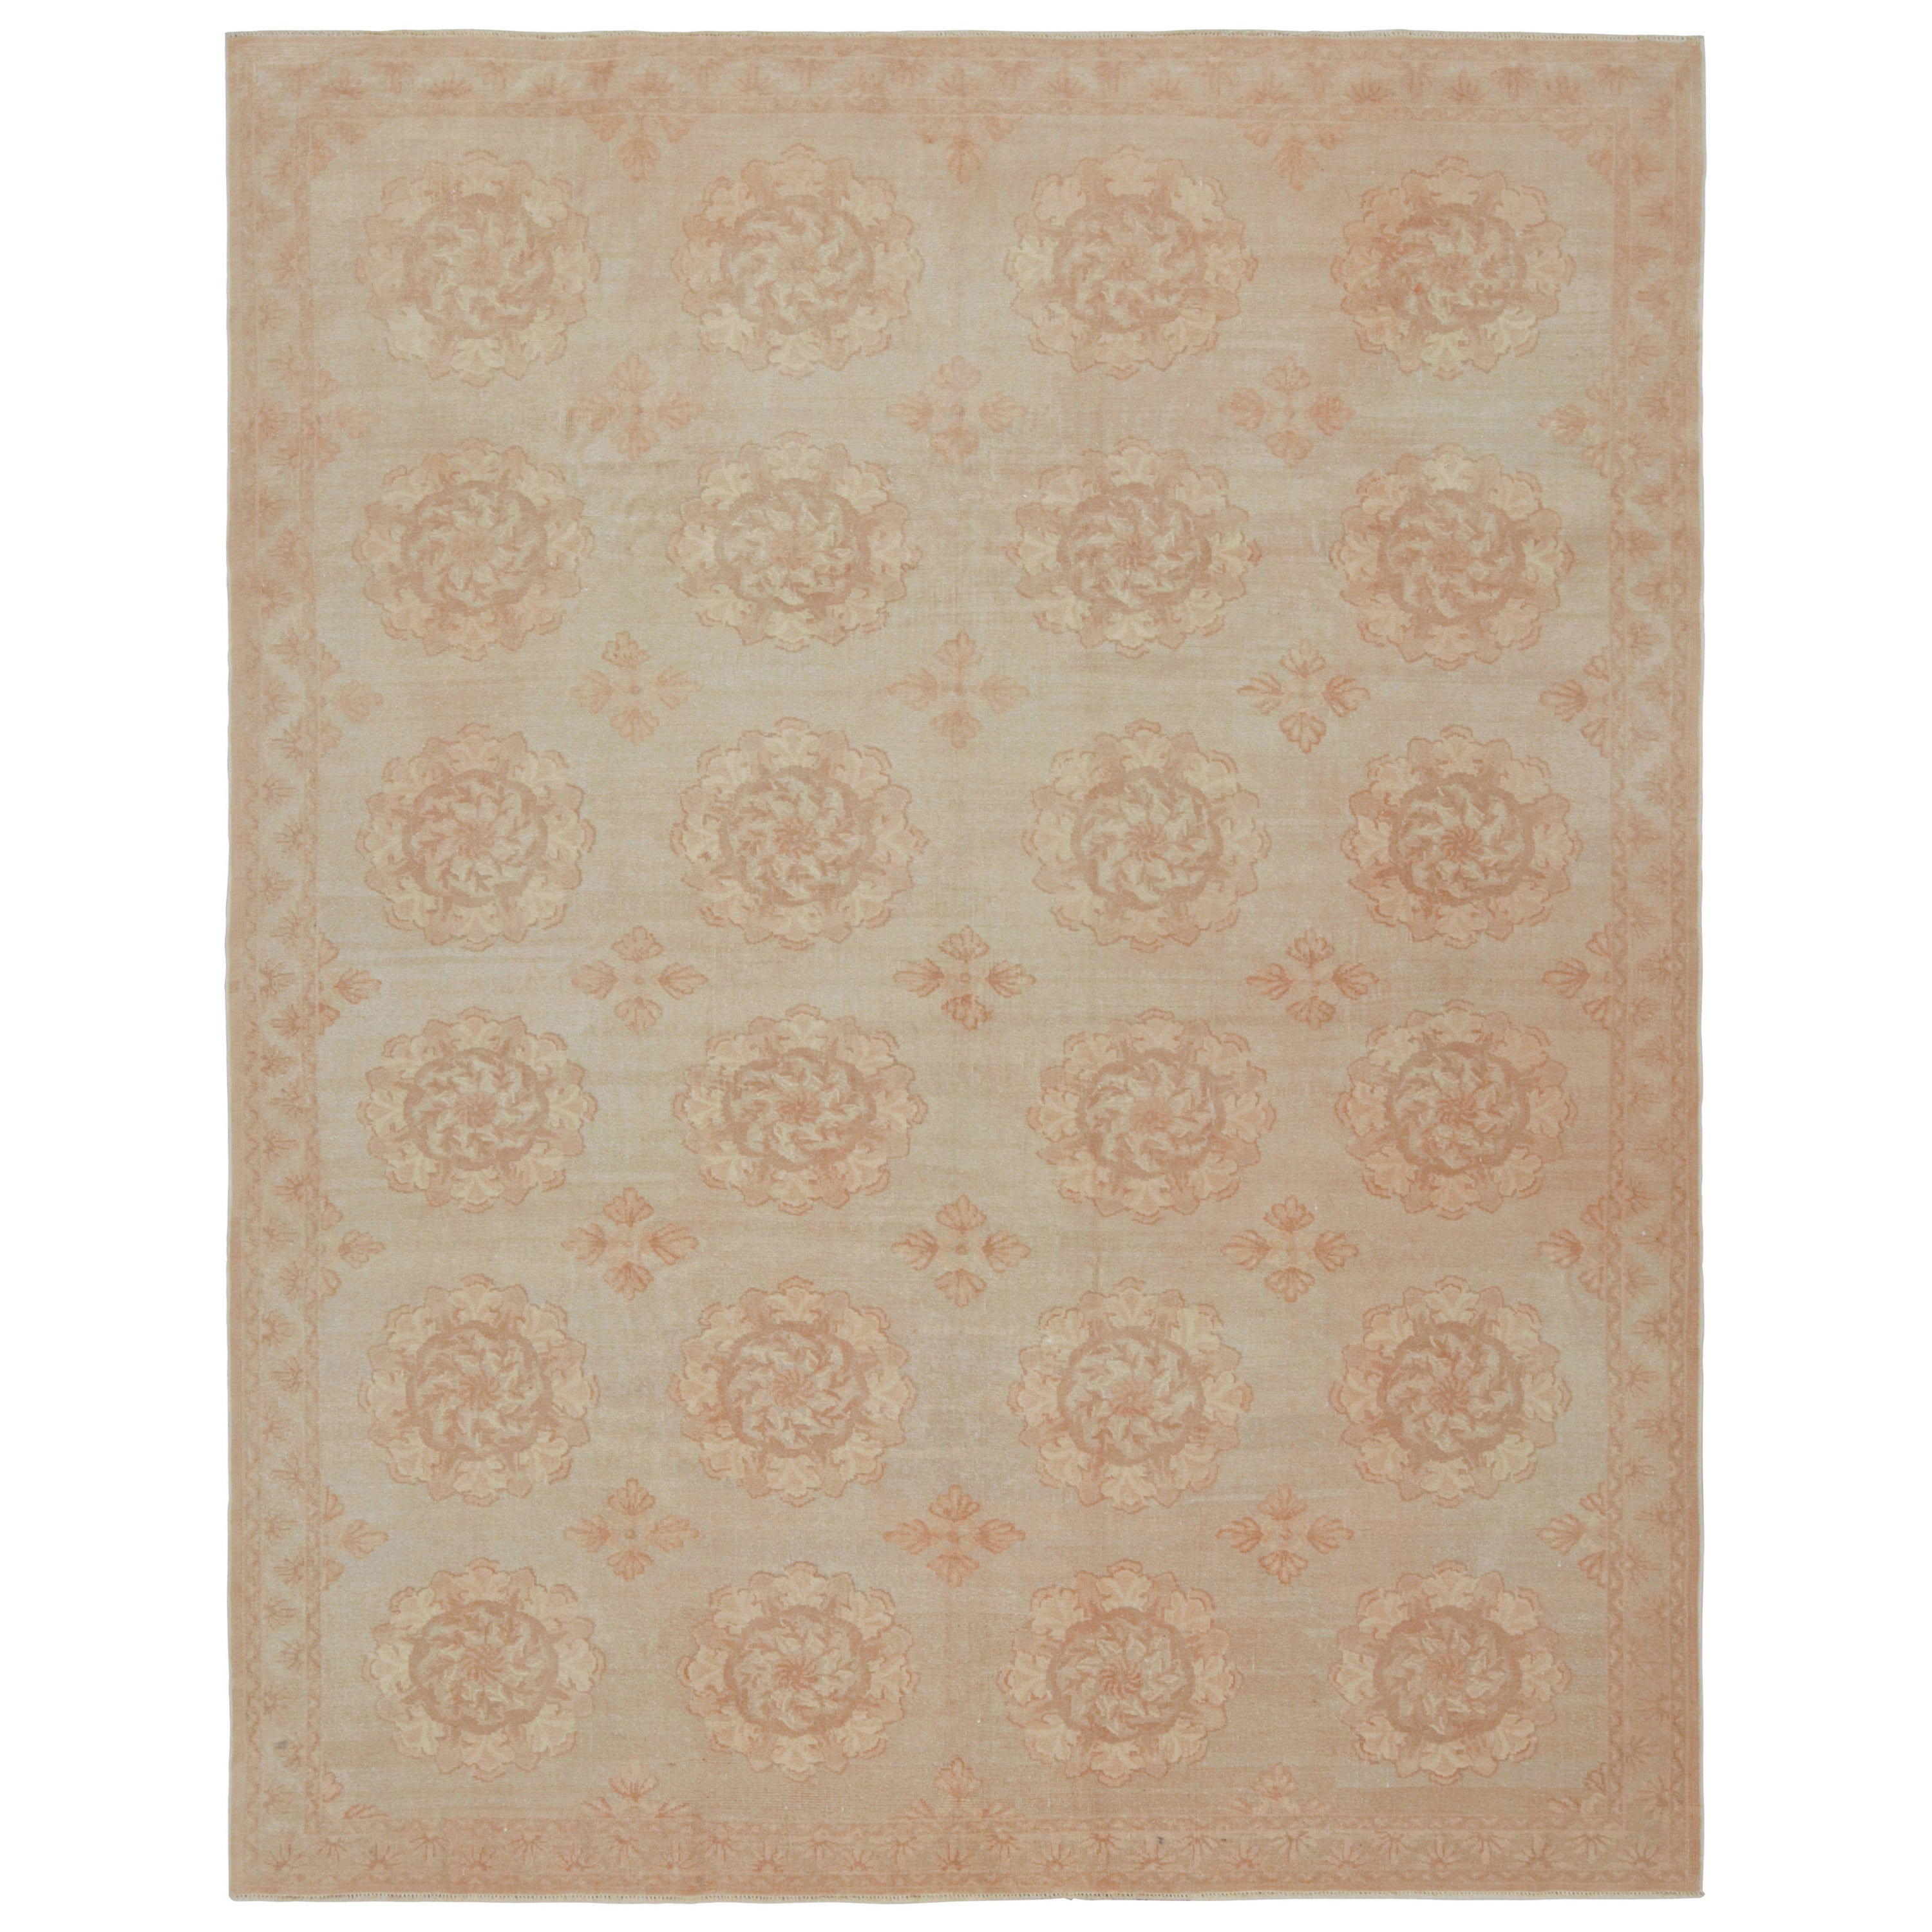 Rug & Kilim’s Contemporary European Style Rug with Beige-Brown Floral Medallions For Sale